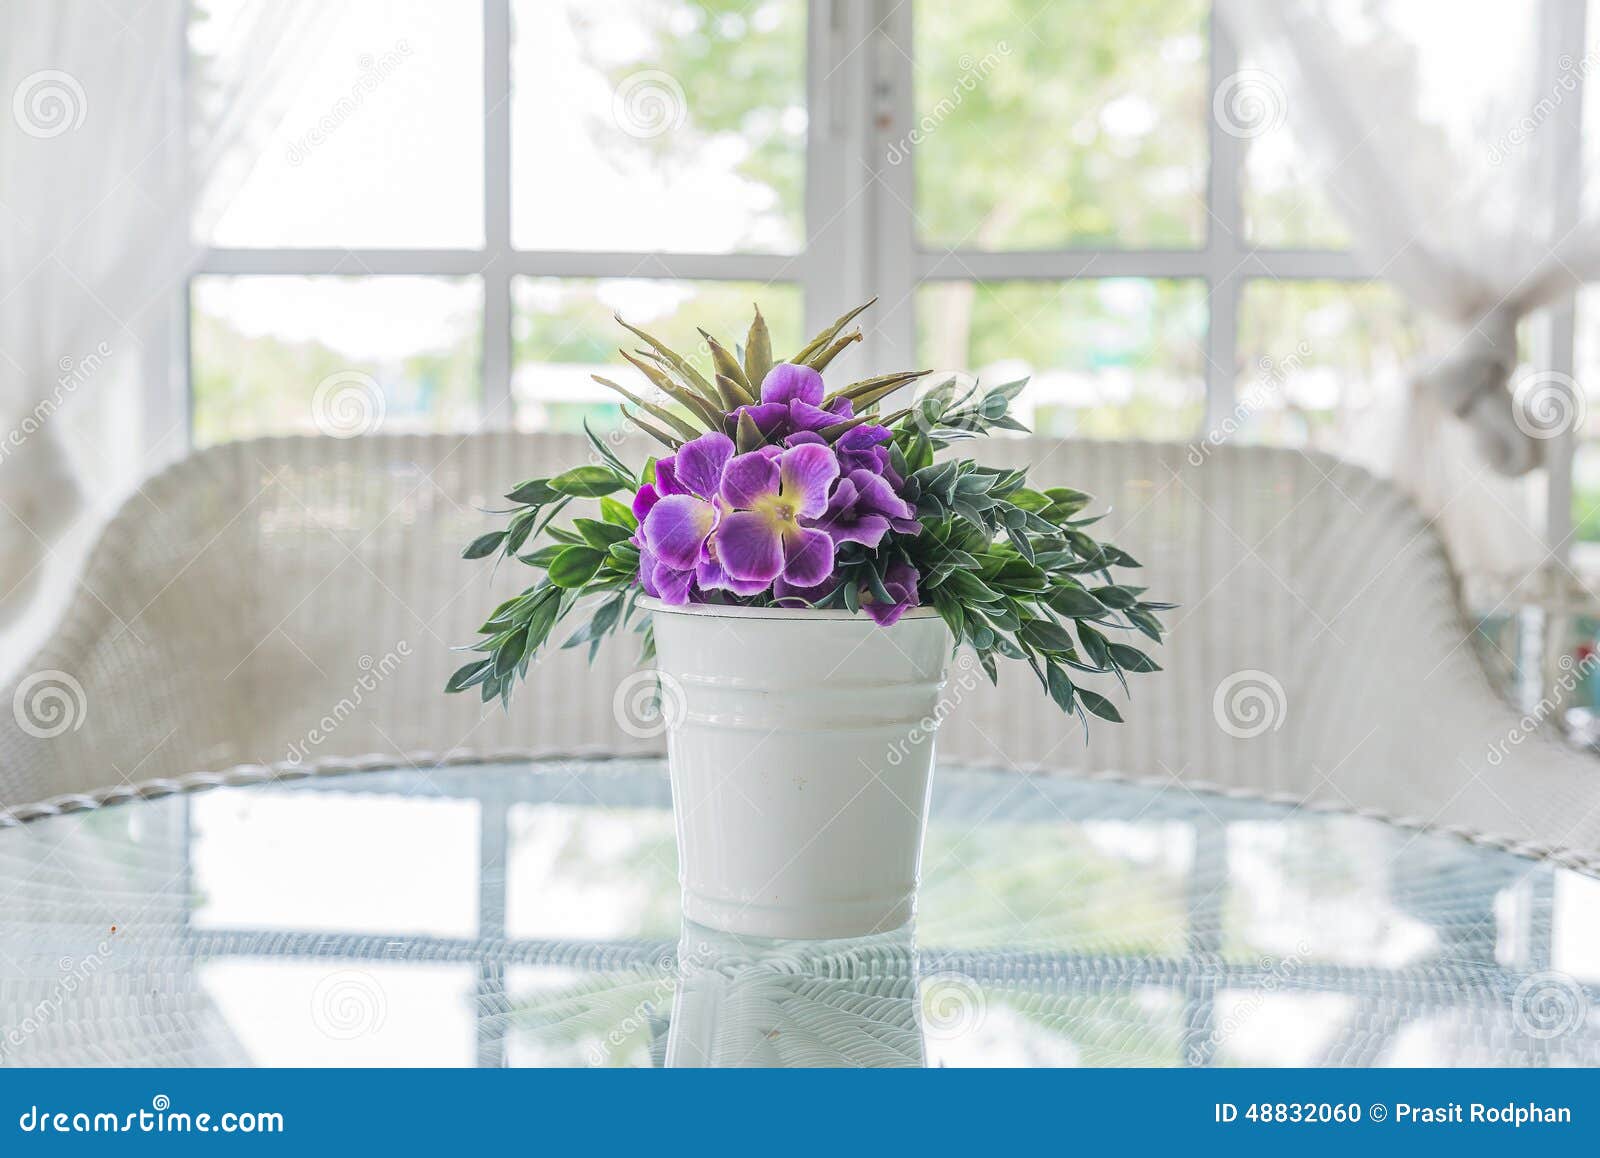 flower in vase on table and window sill background. vintage style decorate